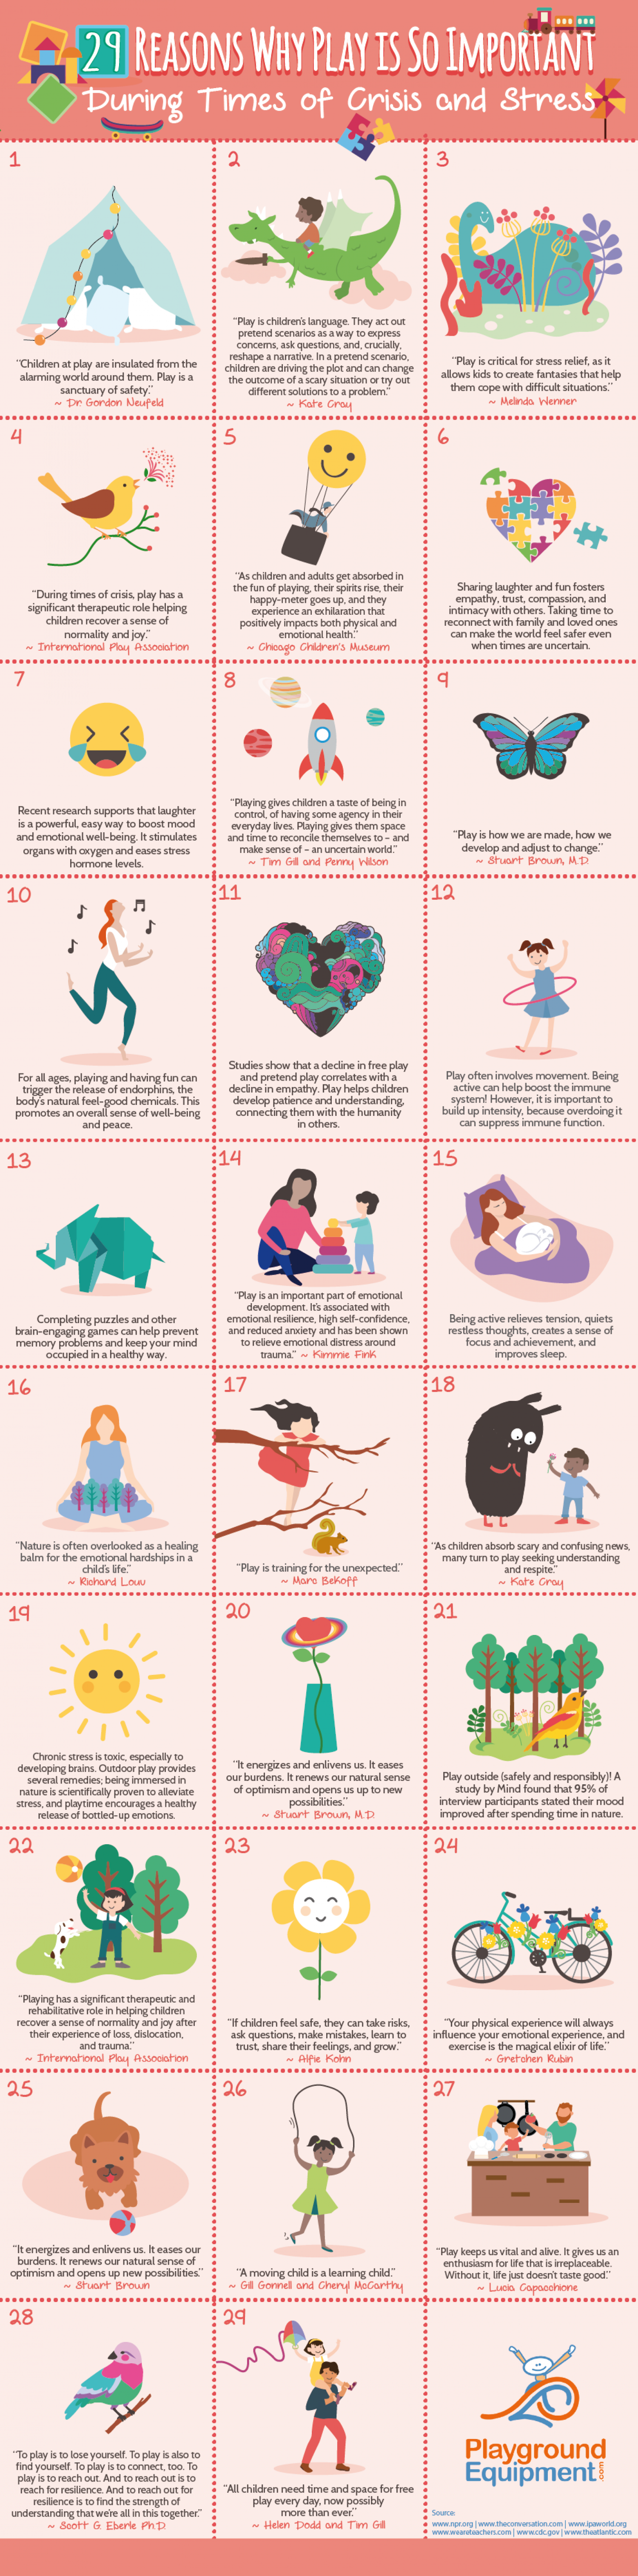 29 Reasons Why Play is So Important During Times of Crisis and Stress Infographic